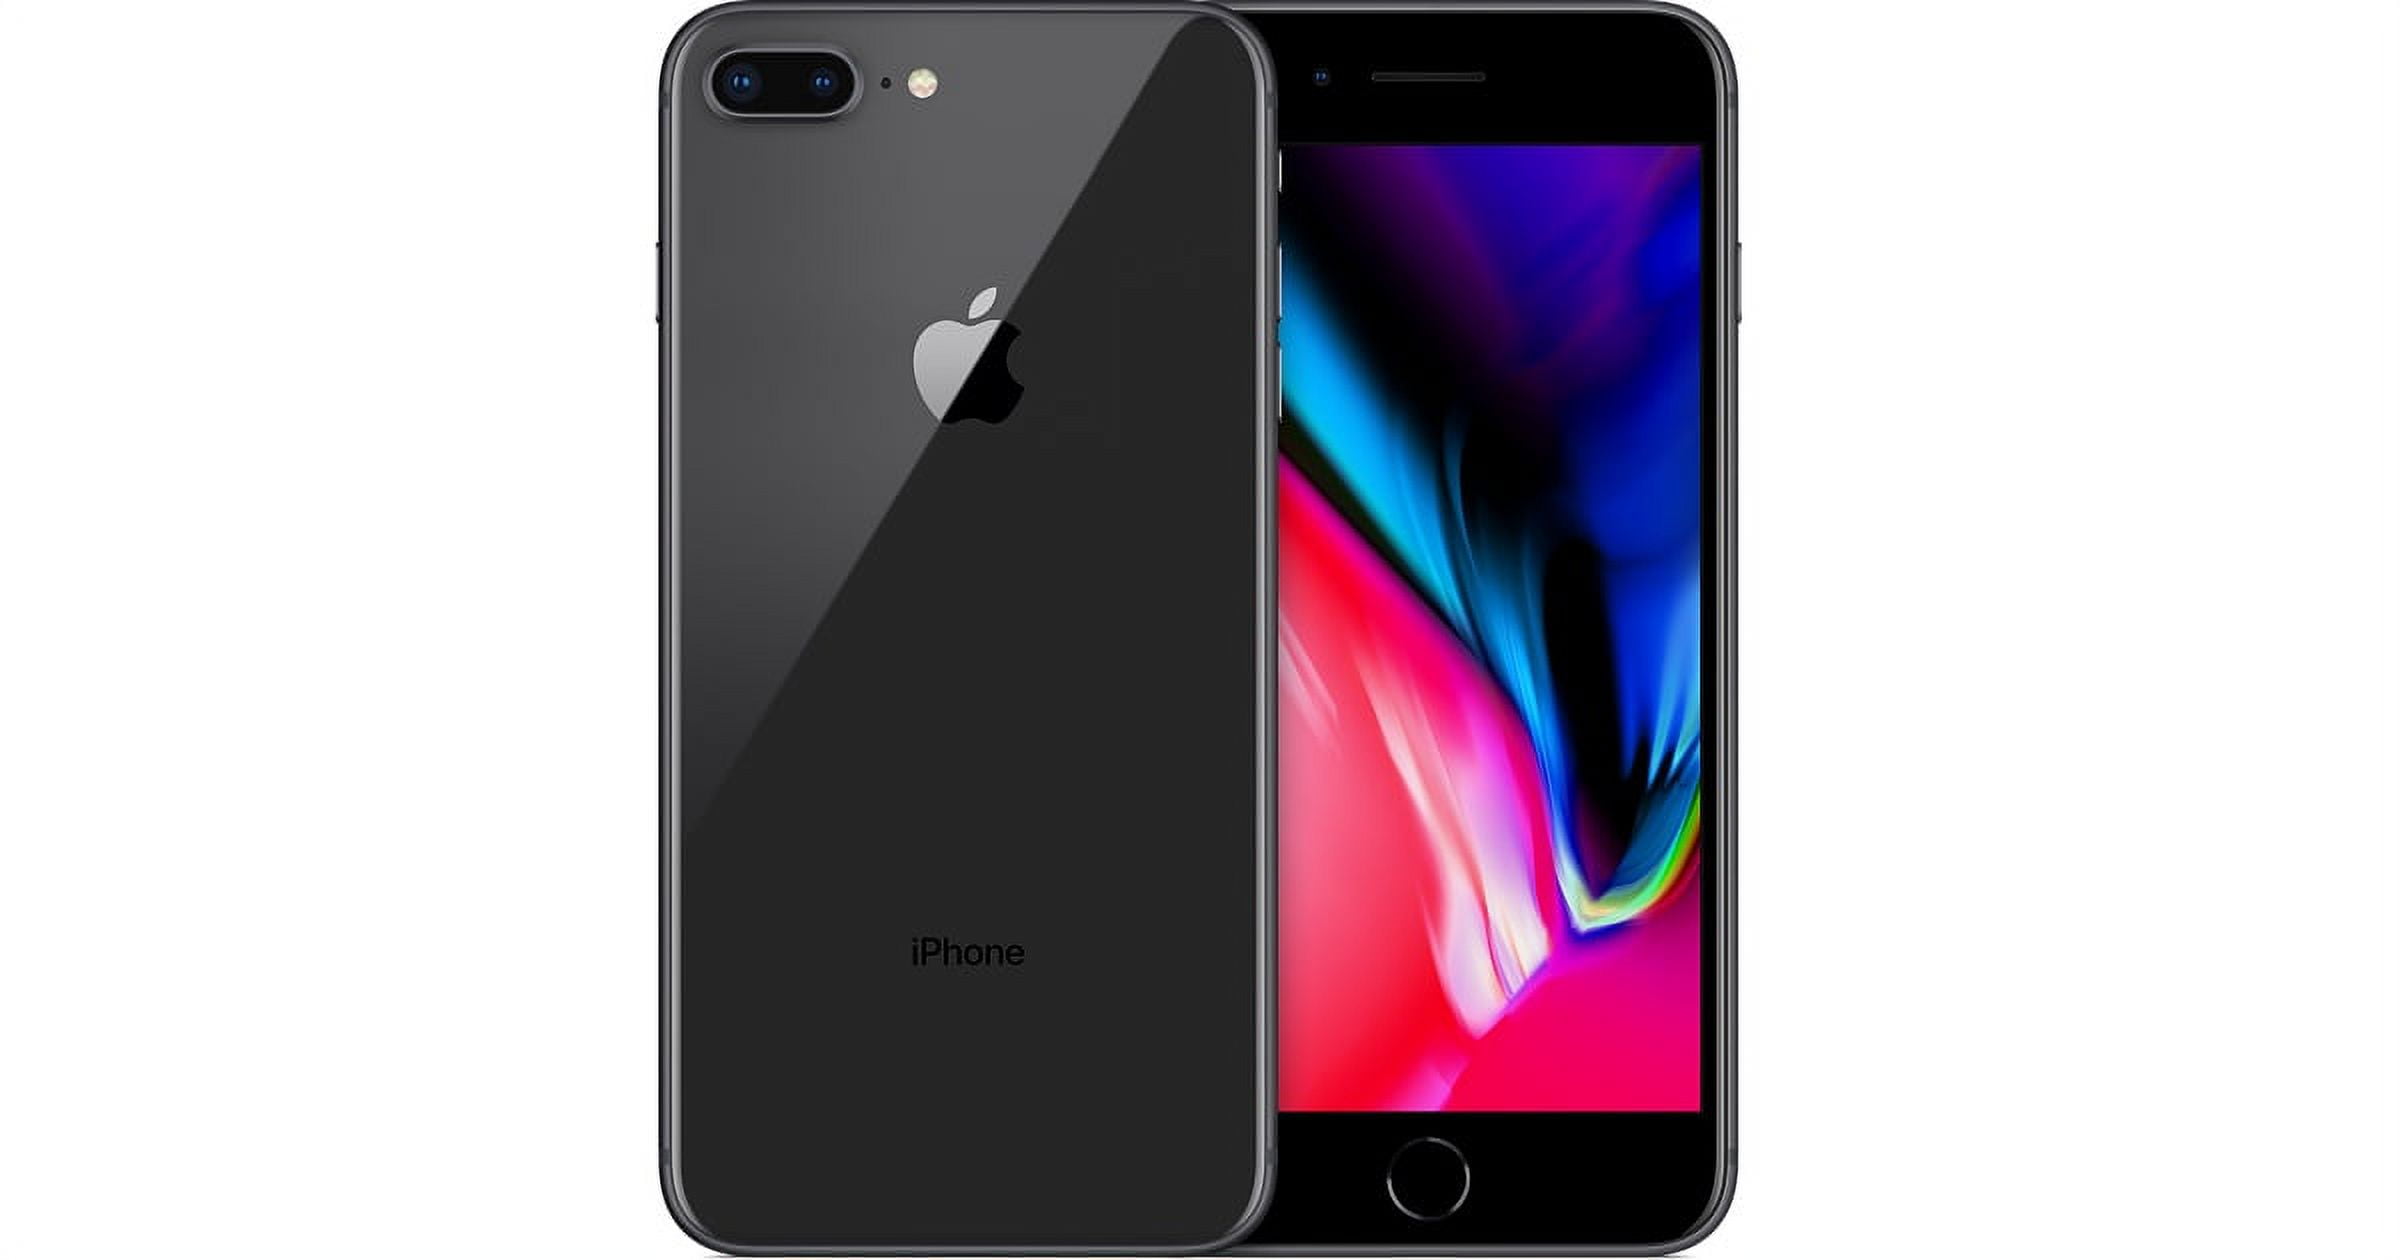 Restored Apple iPhone 8 Plus 256GB, Space Gray - AT&T (Refurbished